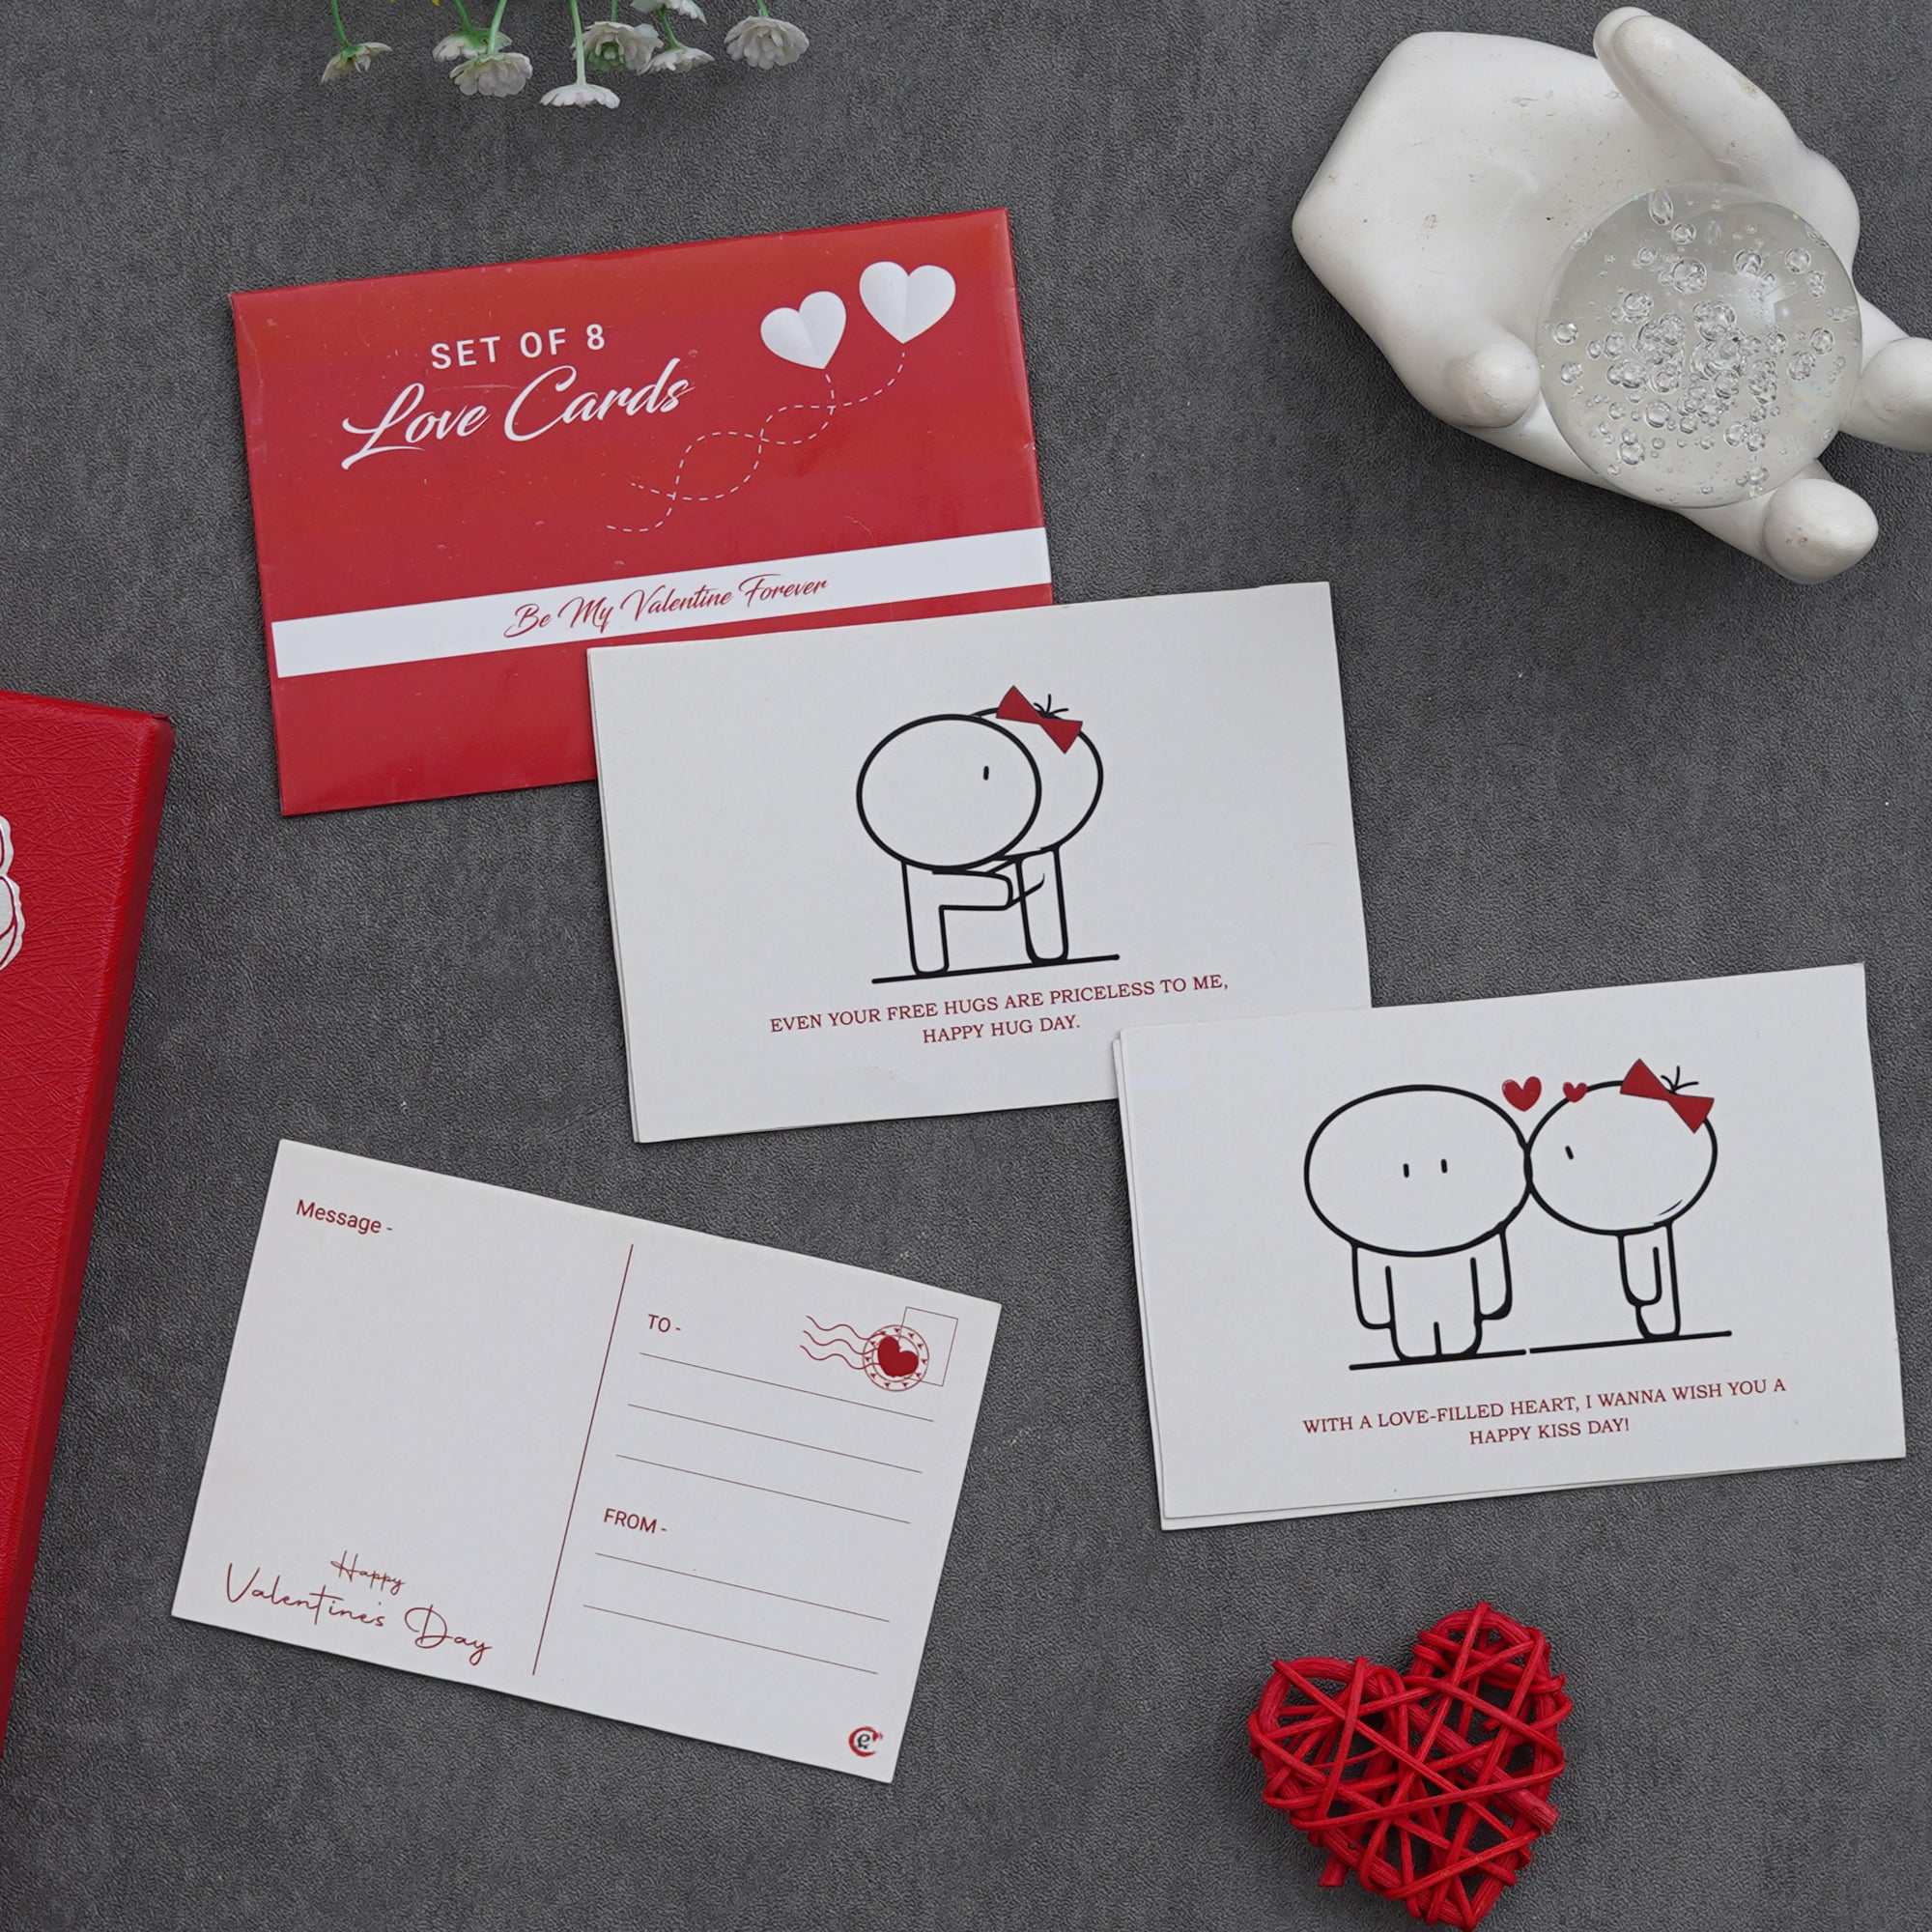 Valentine Combo of Set of 8 Love Post Cards Gift Cards Set, "20 Reasons Why I Love You" Printed on Little Red Hearts Decorative Wooden Gift Set Box, Red Roses Bouquet and White, Red Teddy Bear Valentine's Rectangle Shaped Gift Box 1